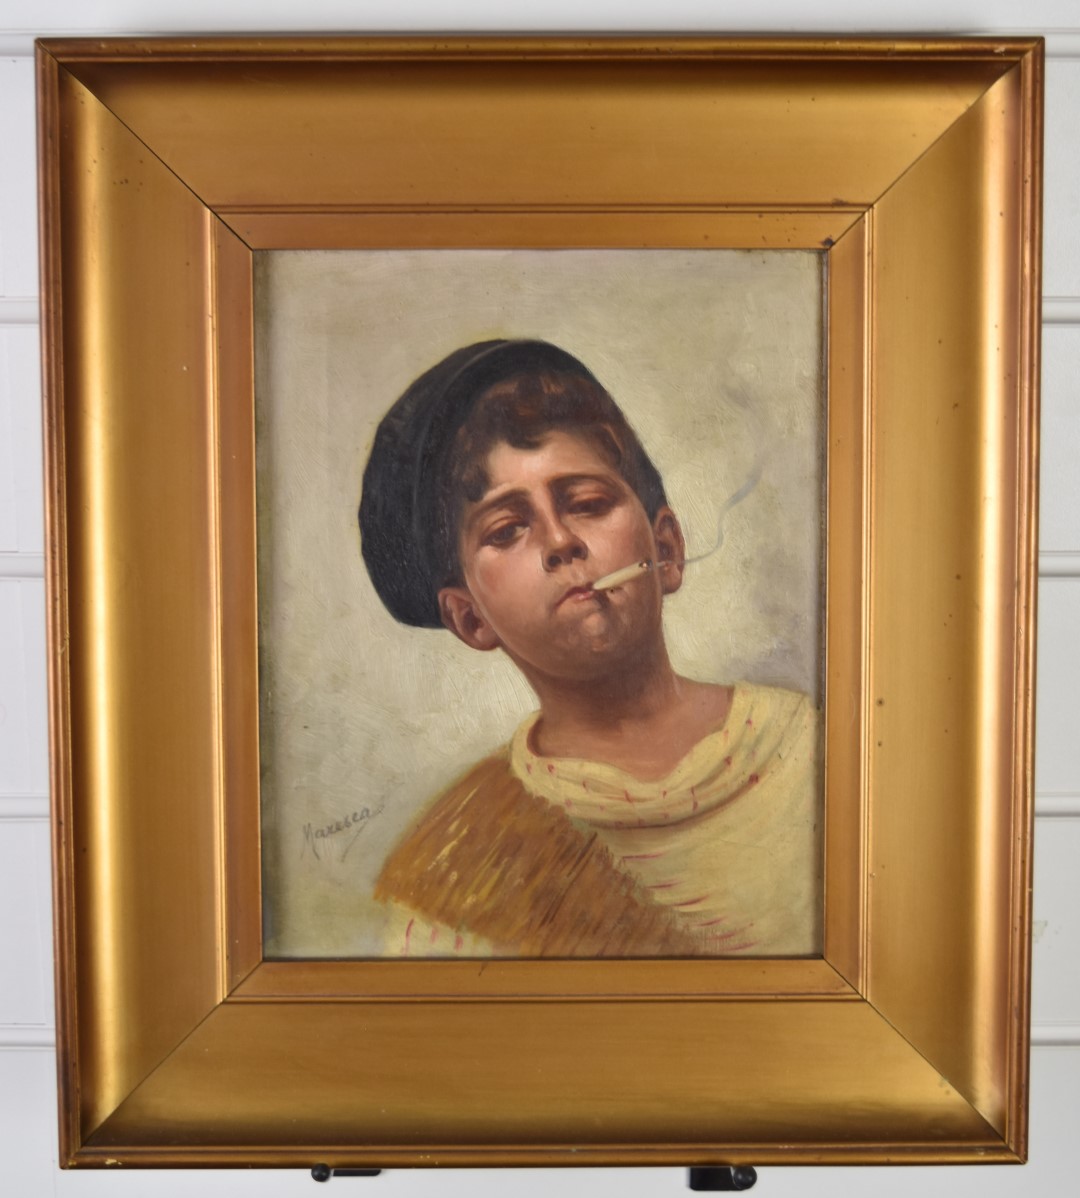 Vincenzo Maresca (19thC Italian) portrait of a boy smoking, signed lower left, 27 x 21cm, in gilt - Image 3 of 5